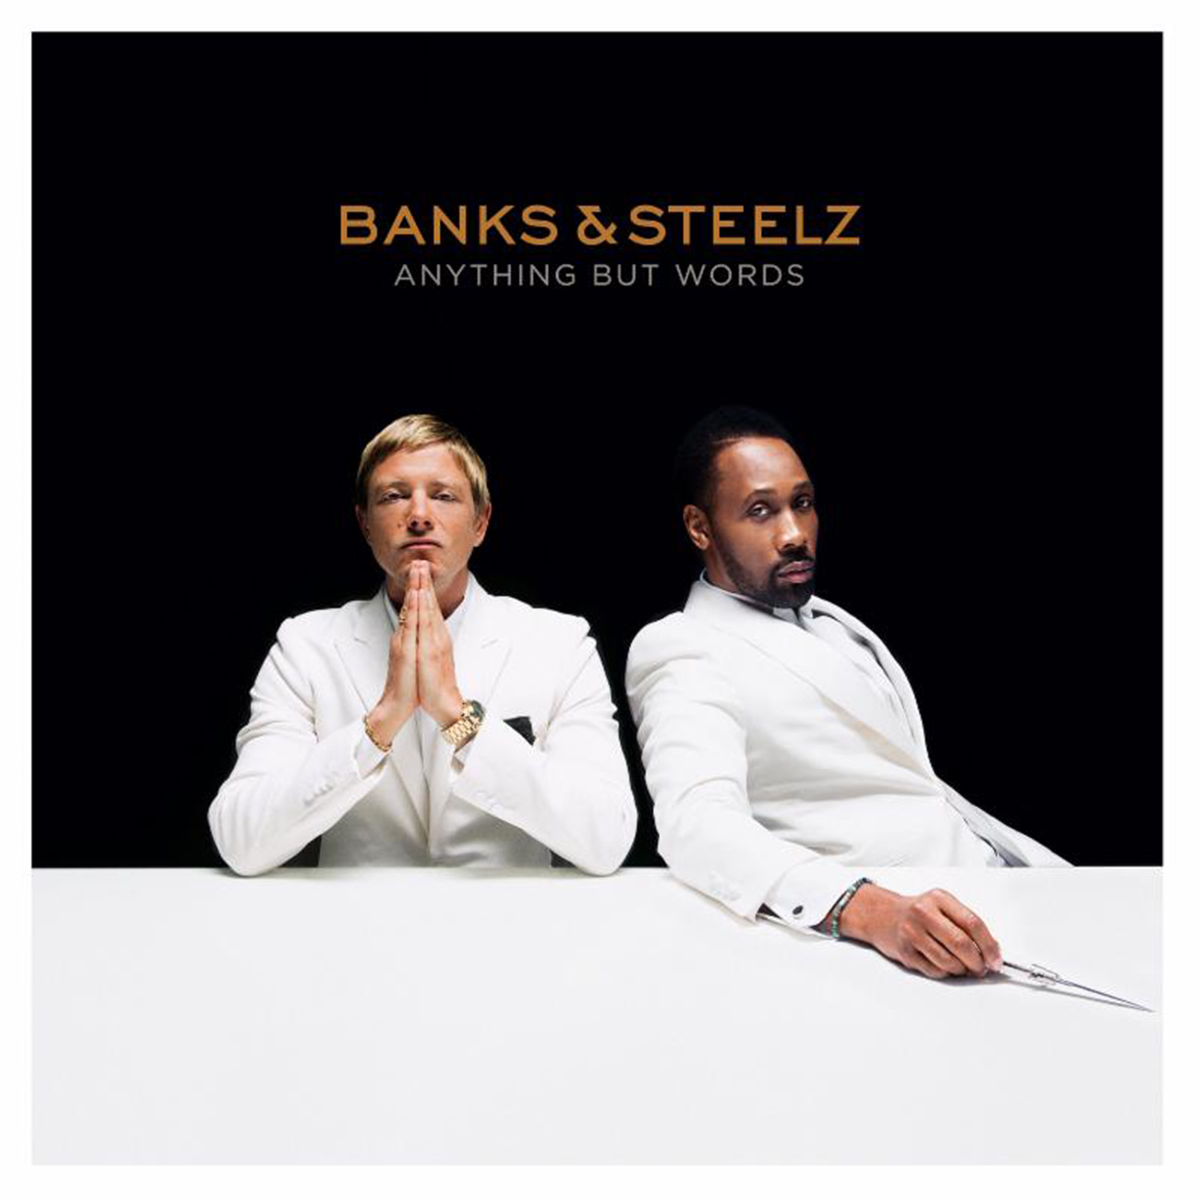 Banks and Steelz